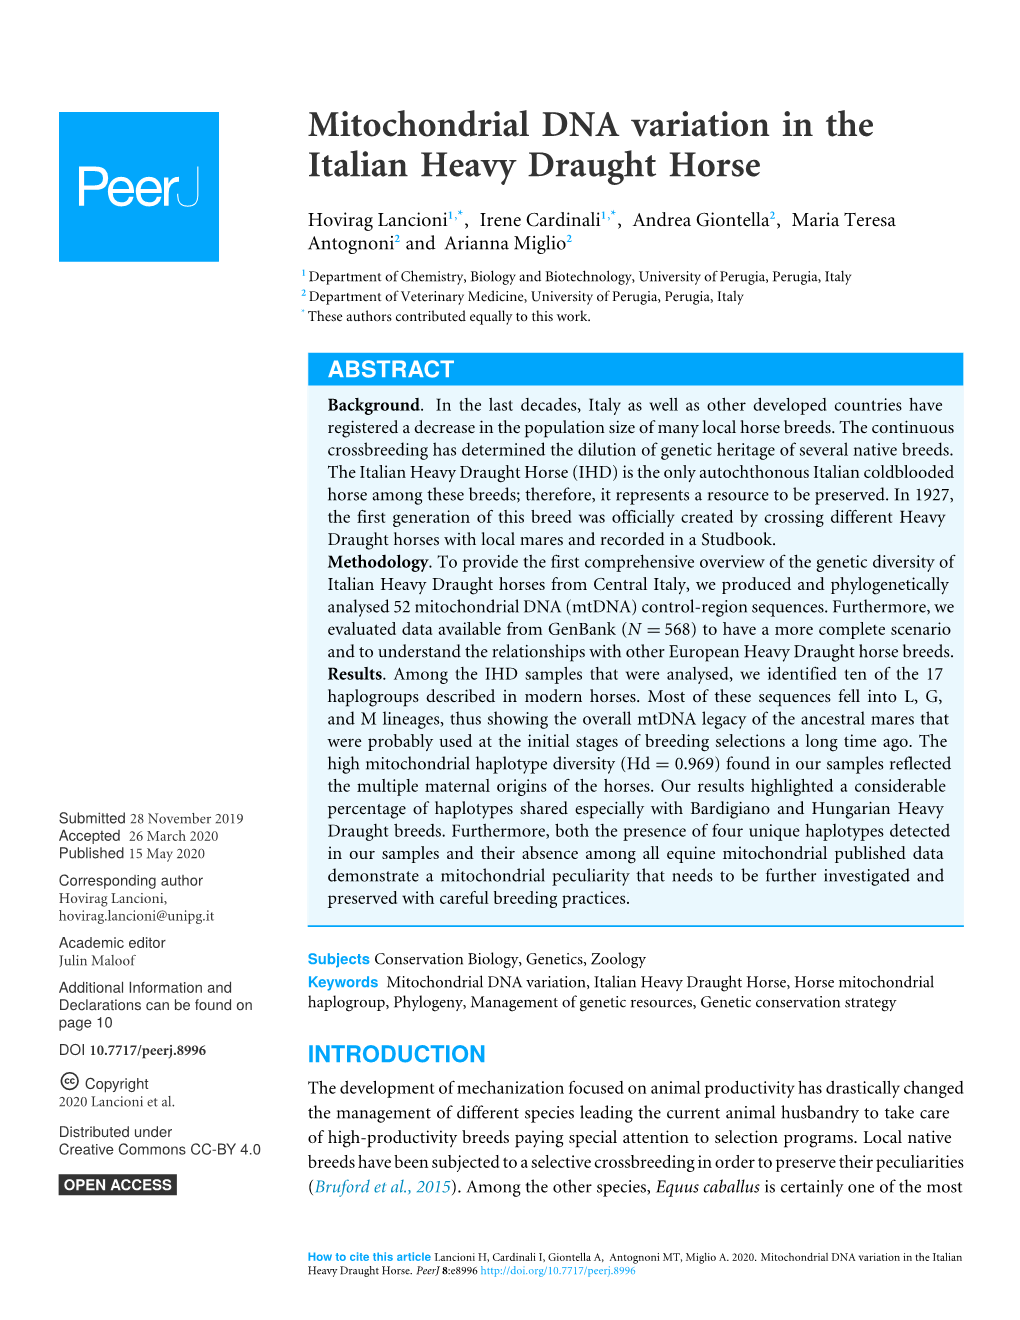 Mitochondrial DNA Variation in the Italian Heavy Draught Horse